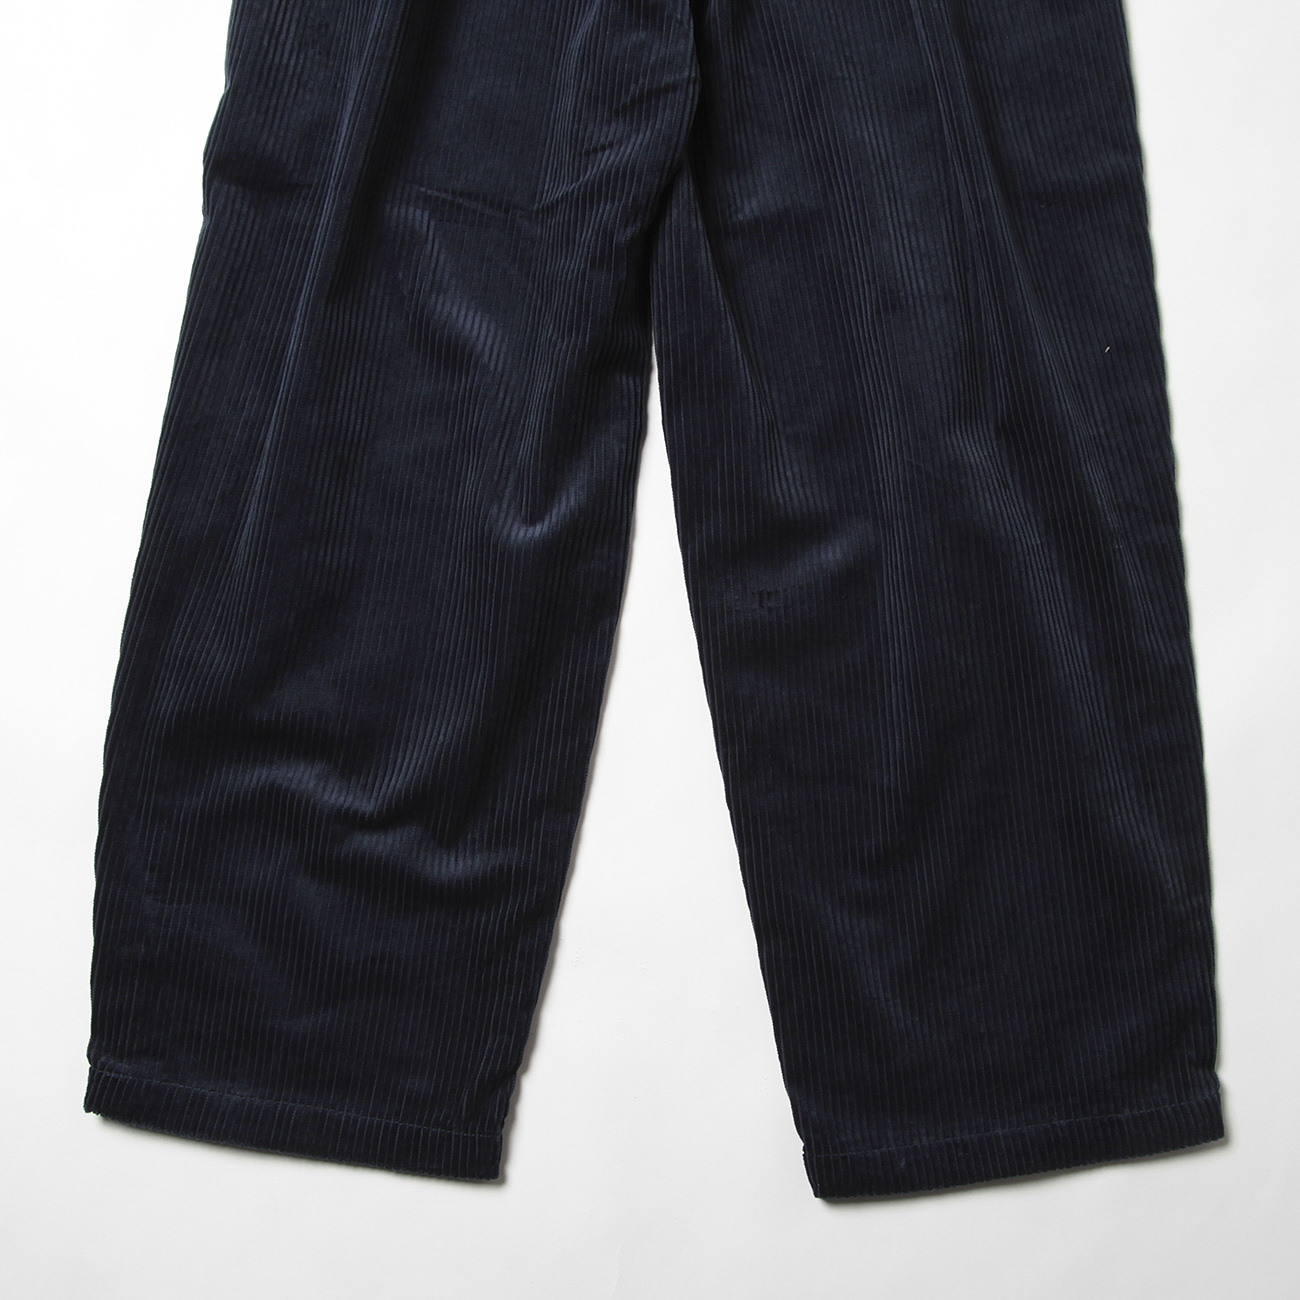 Re:874 Work Trousers - Navy